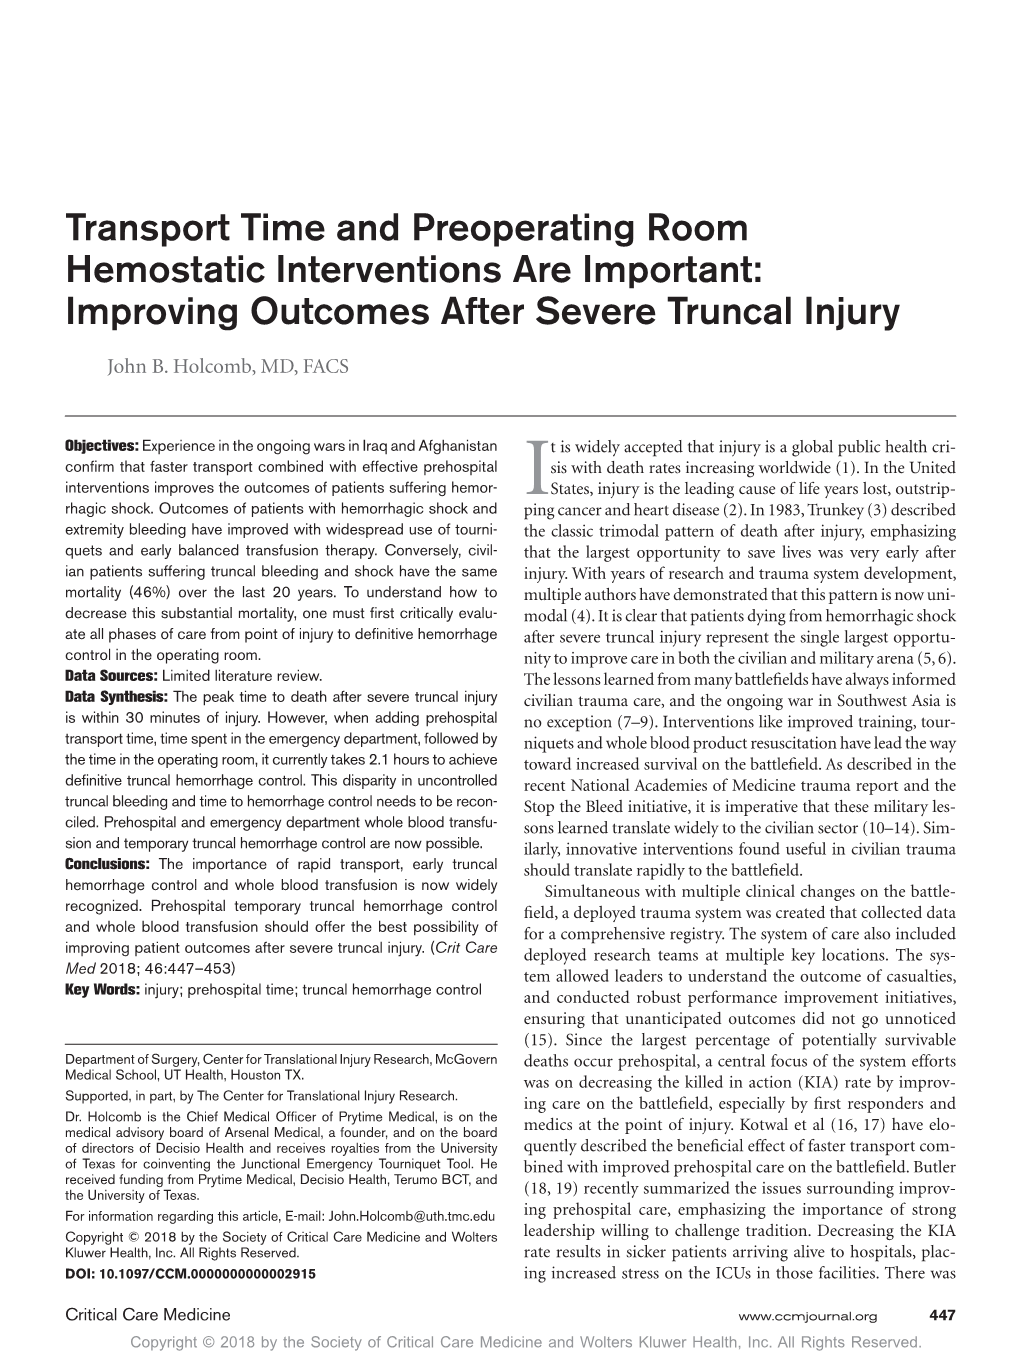 Improving Outcomes After Severe Truncal Injury